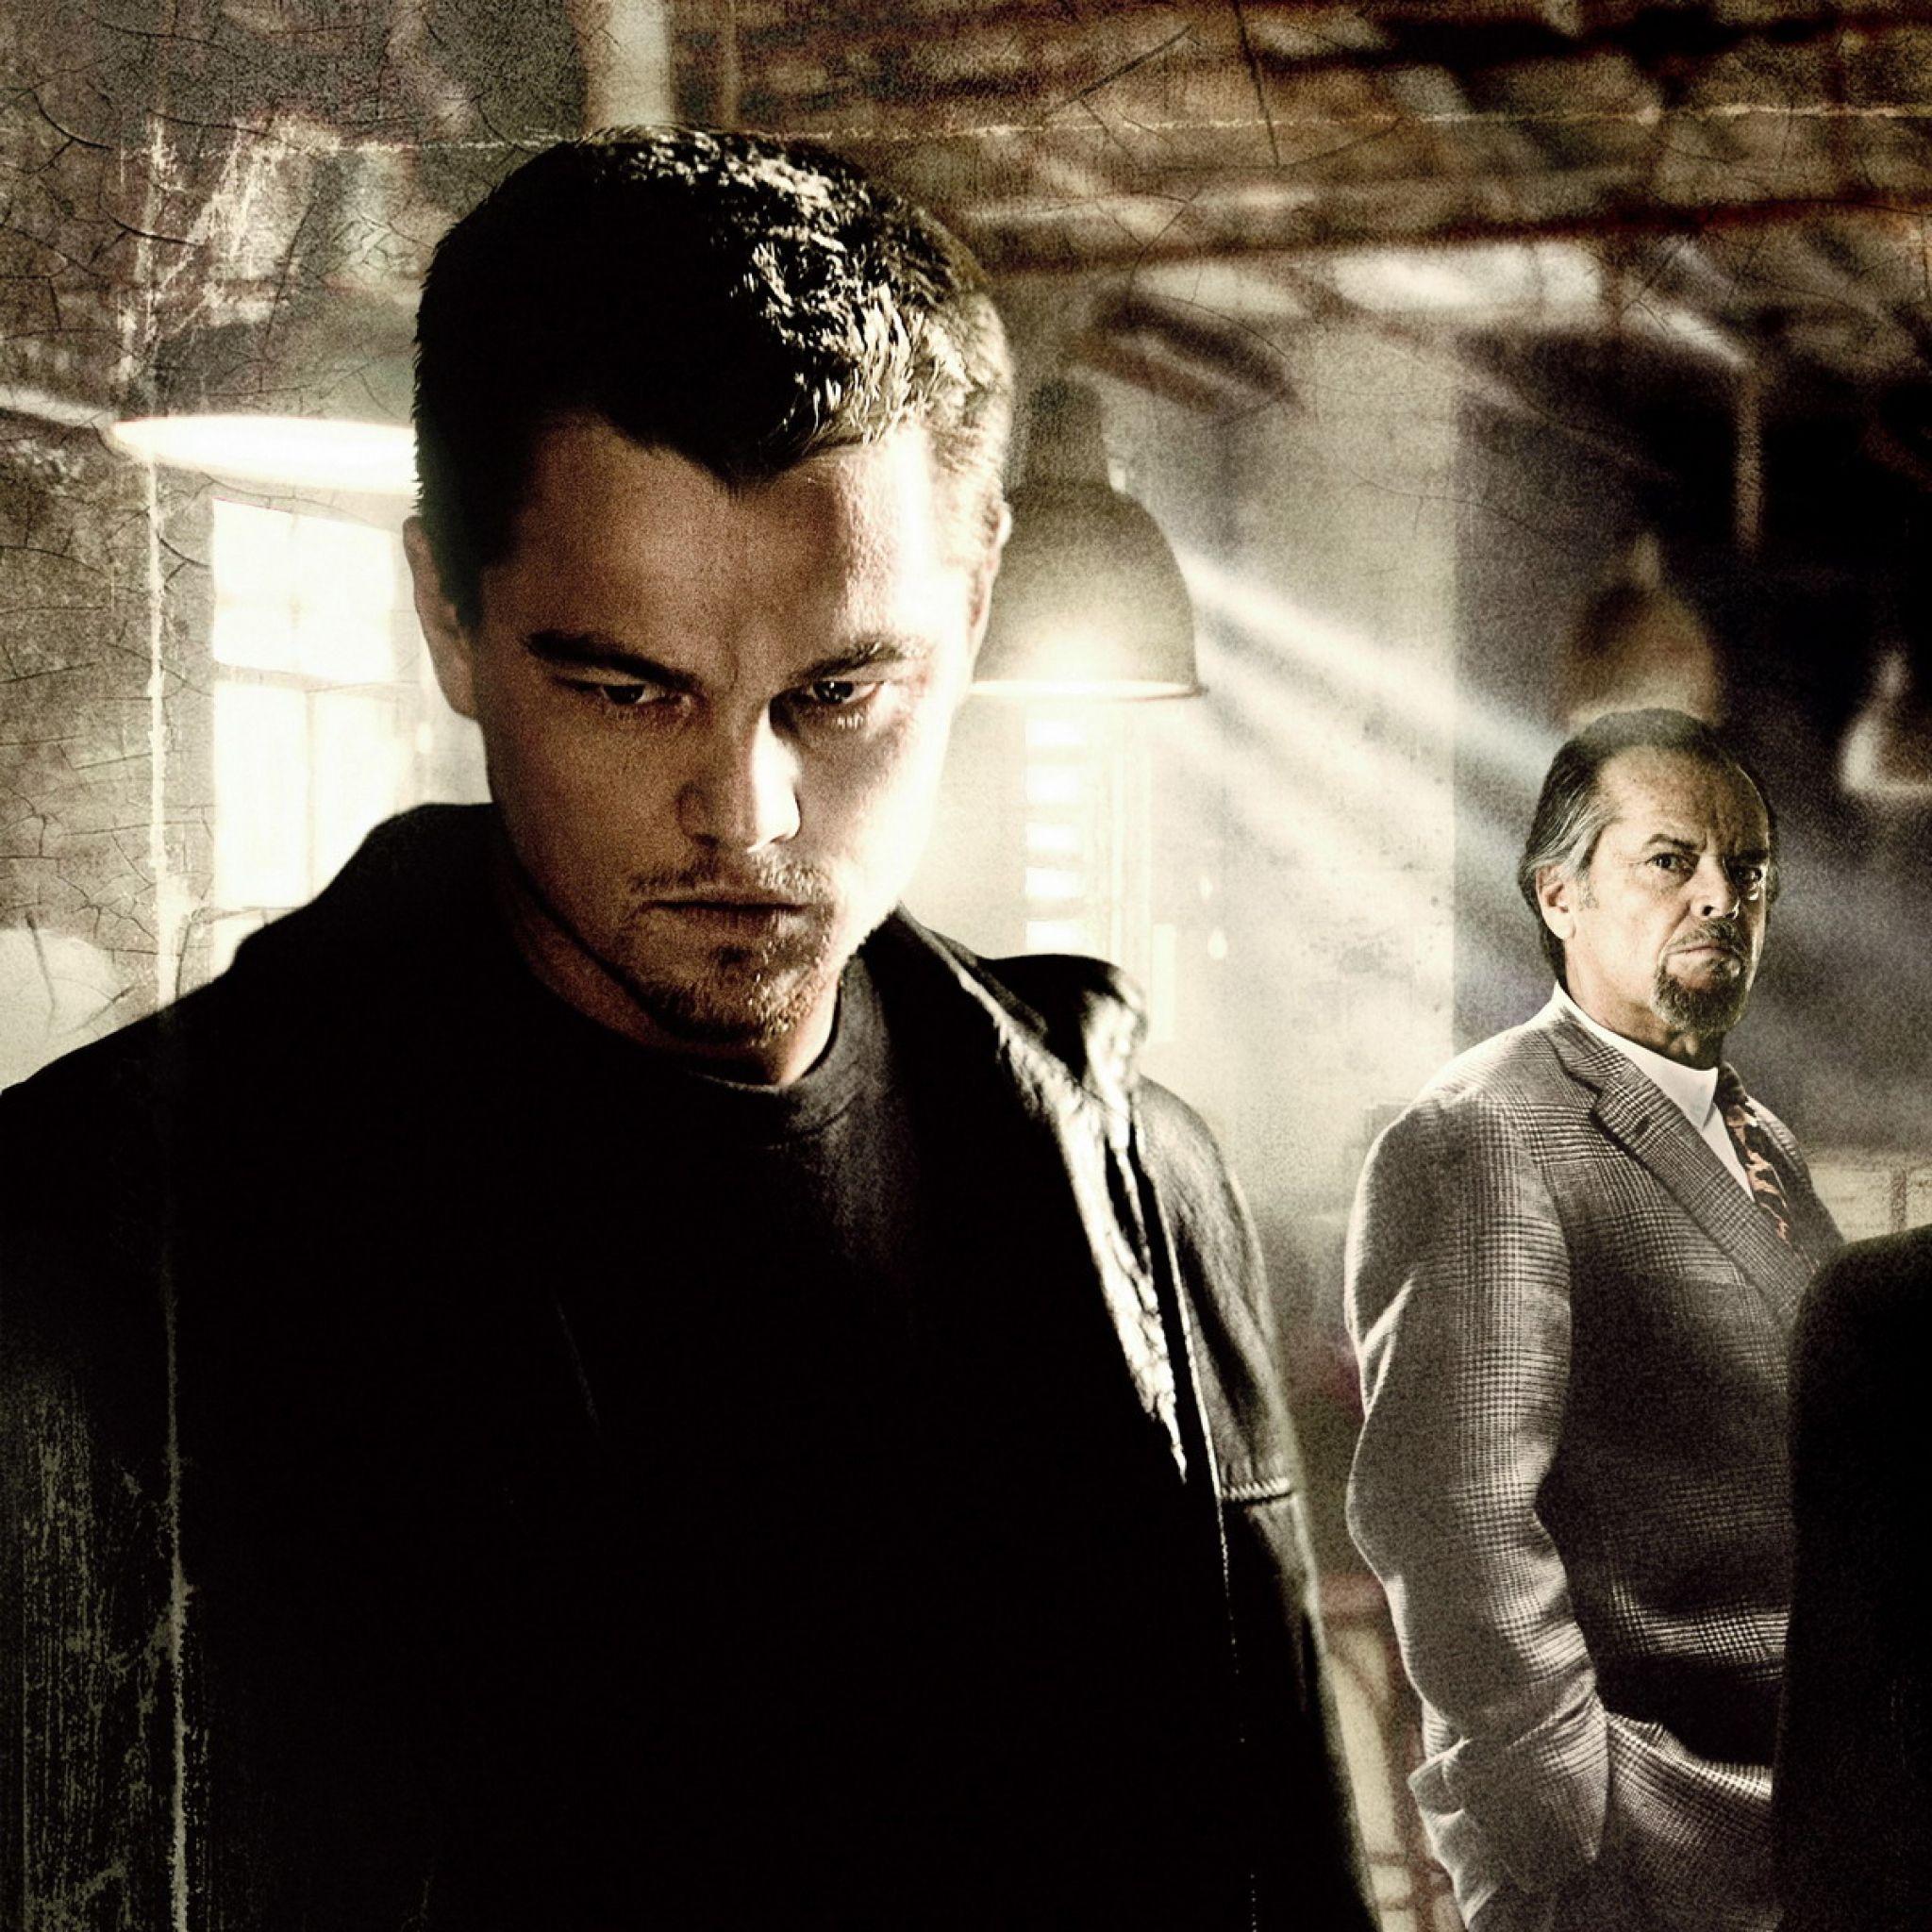 Download Wallpaper 2048x2048 The departed, Billy, Colin sullivan